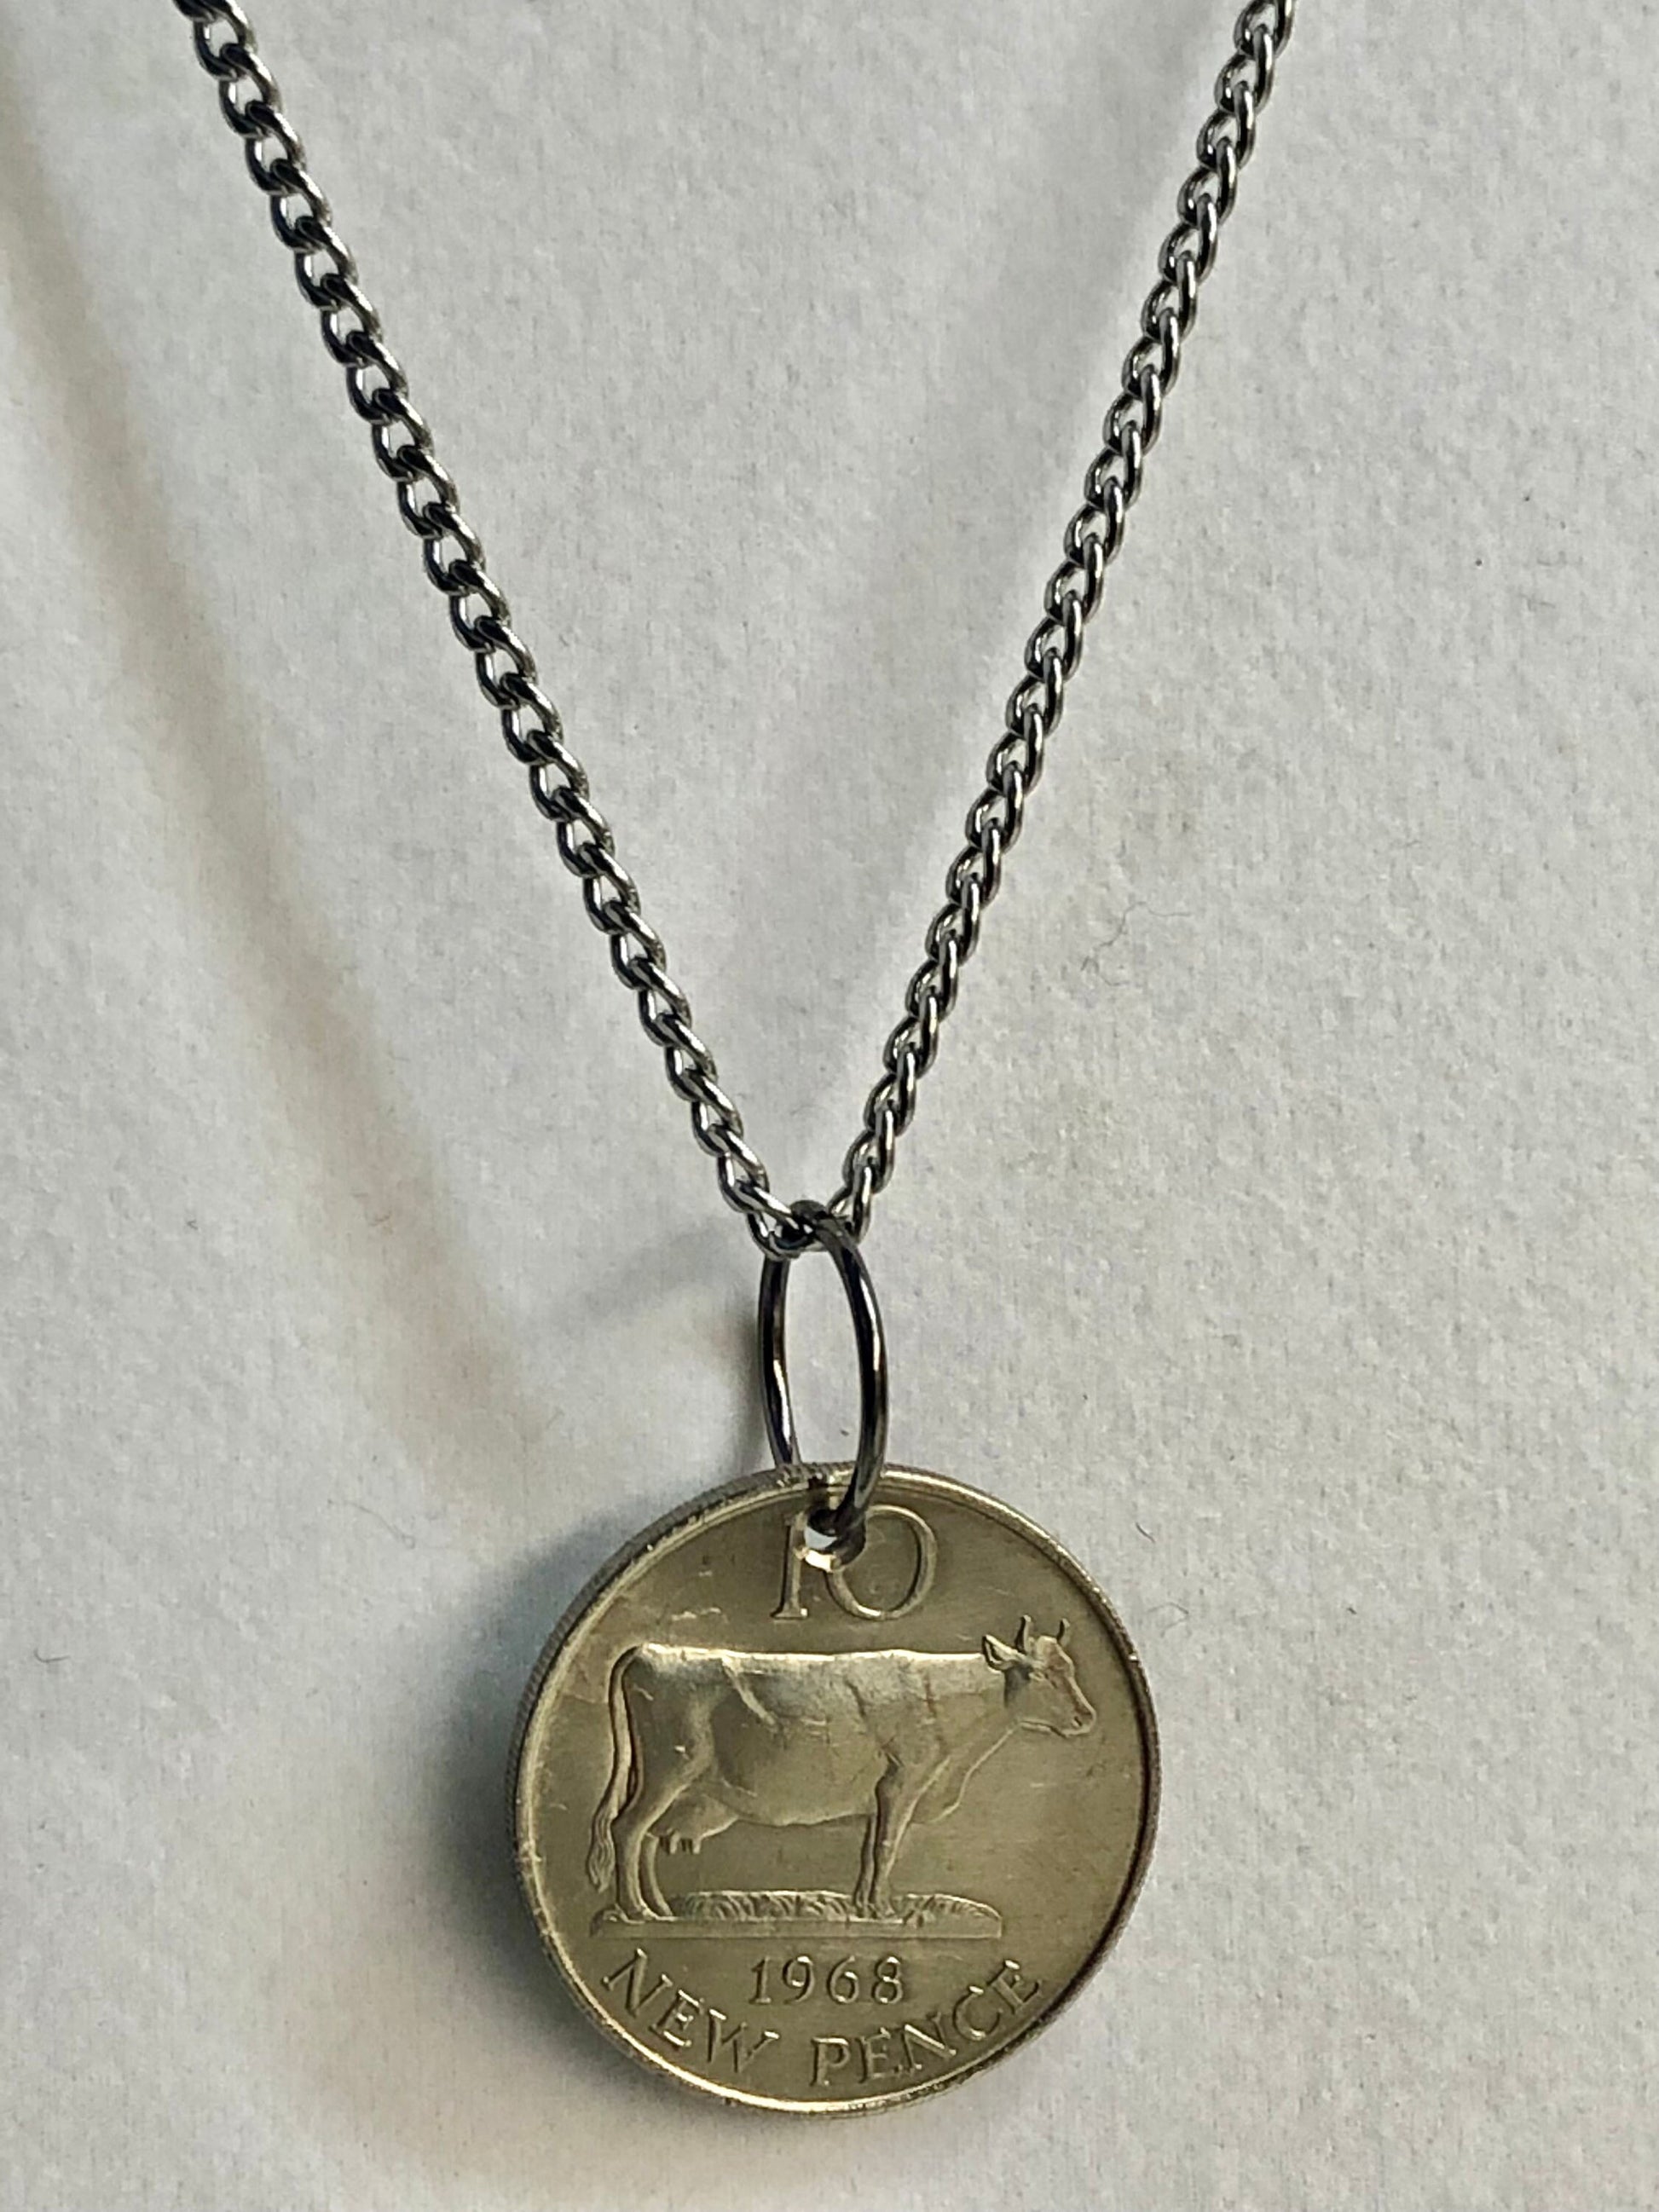 Guernsey Coin Pendant 10 Pence Necklace Handmade Custom Made Charm Gift For Friend Coin Charm Gift For Him Her, Coin Collector, World Coins